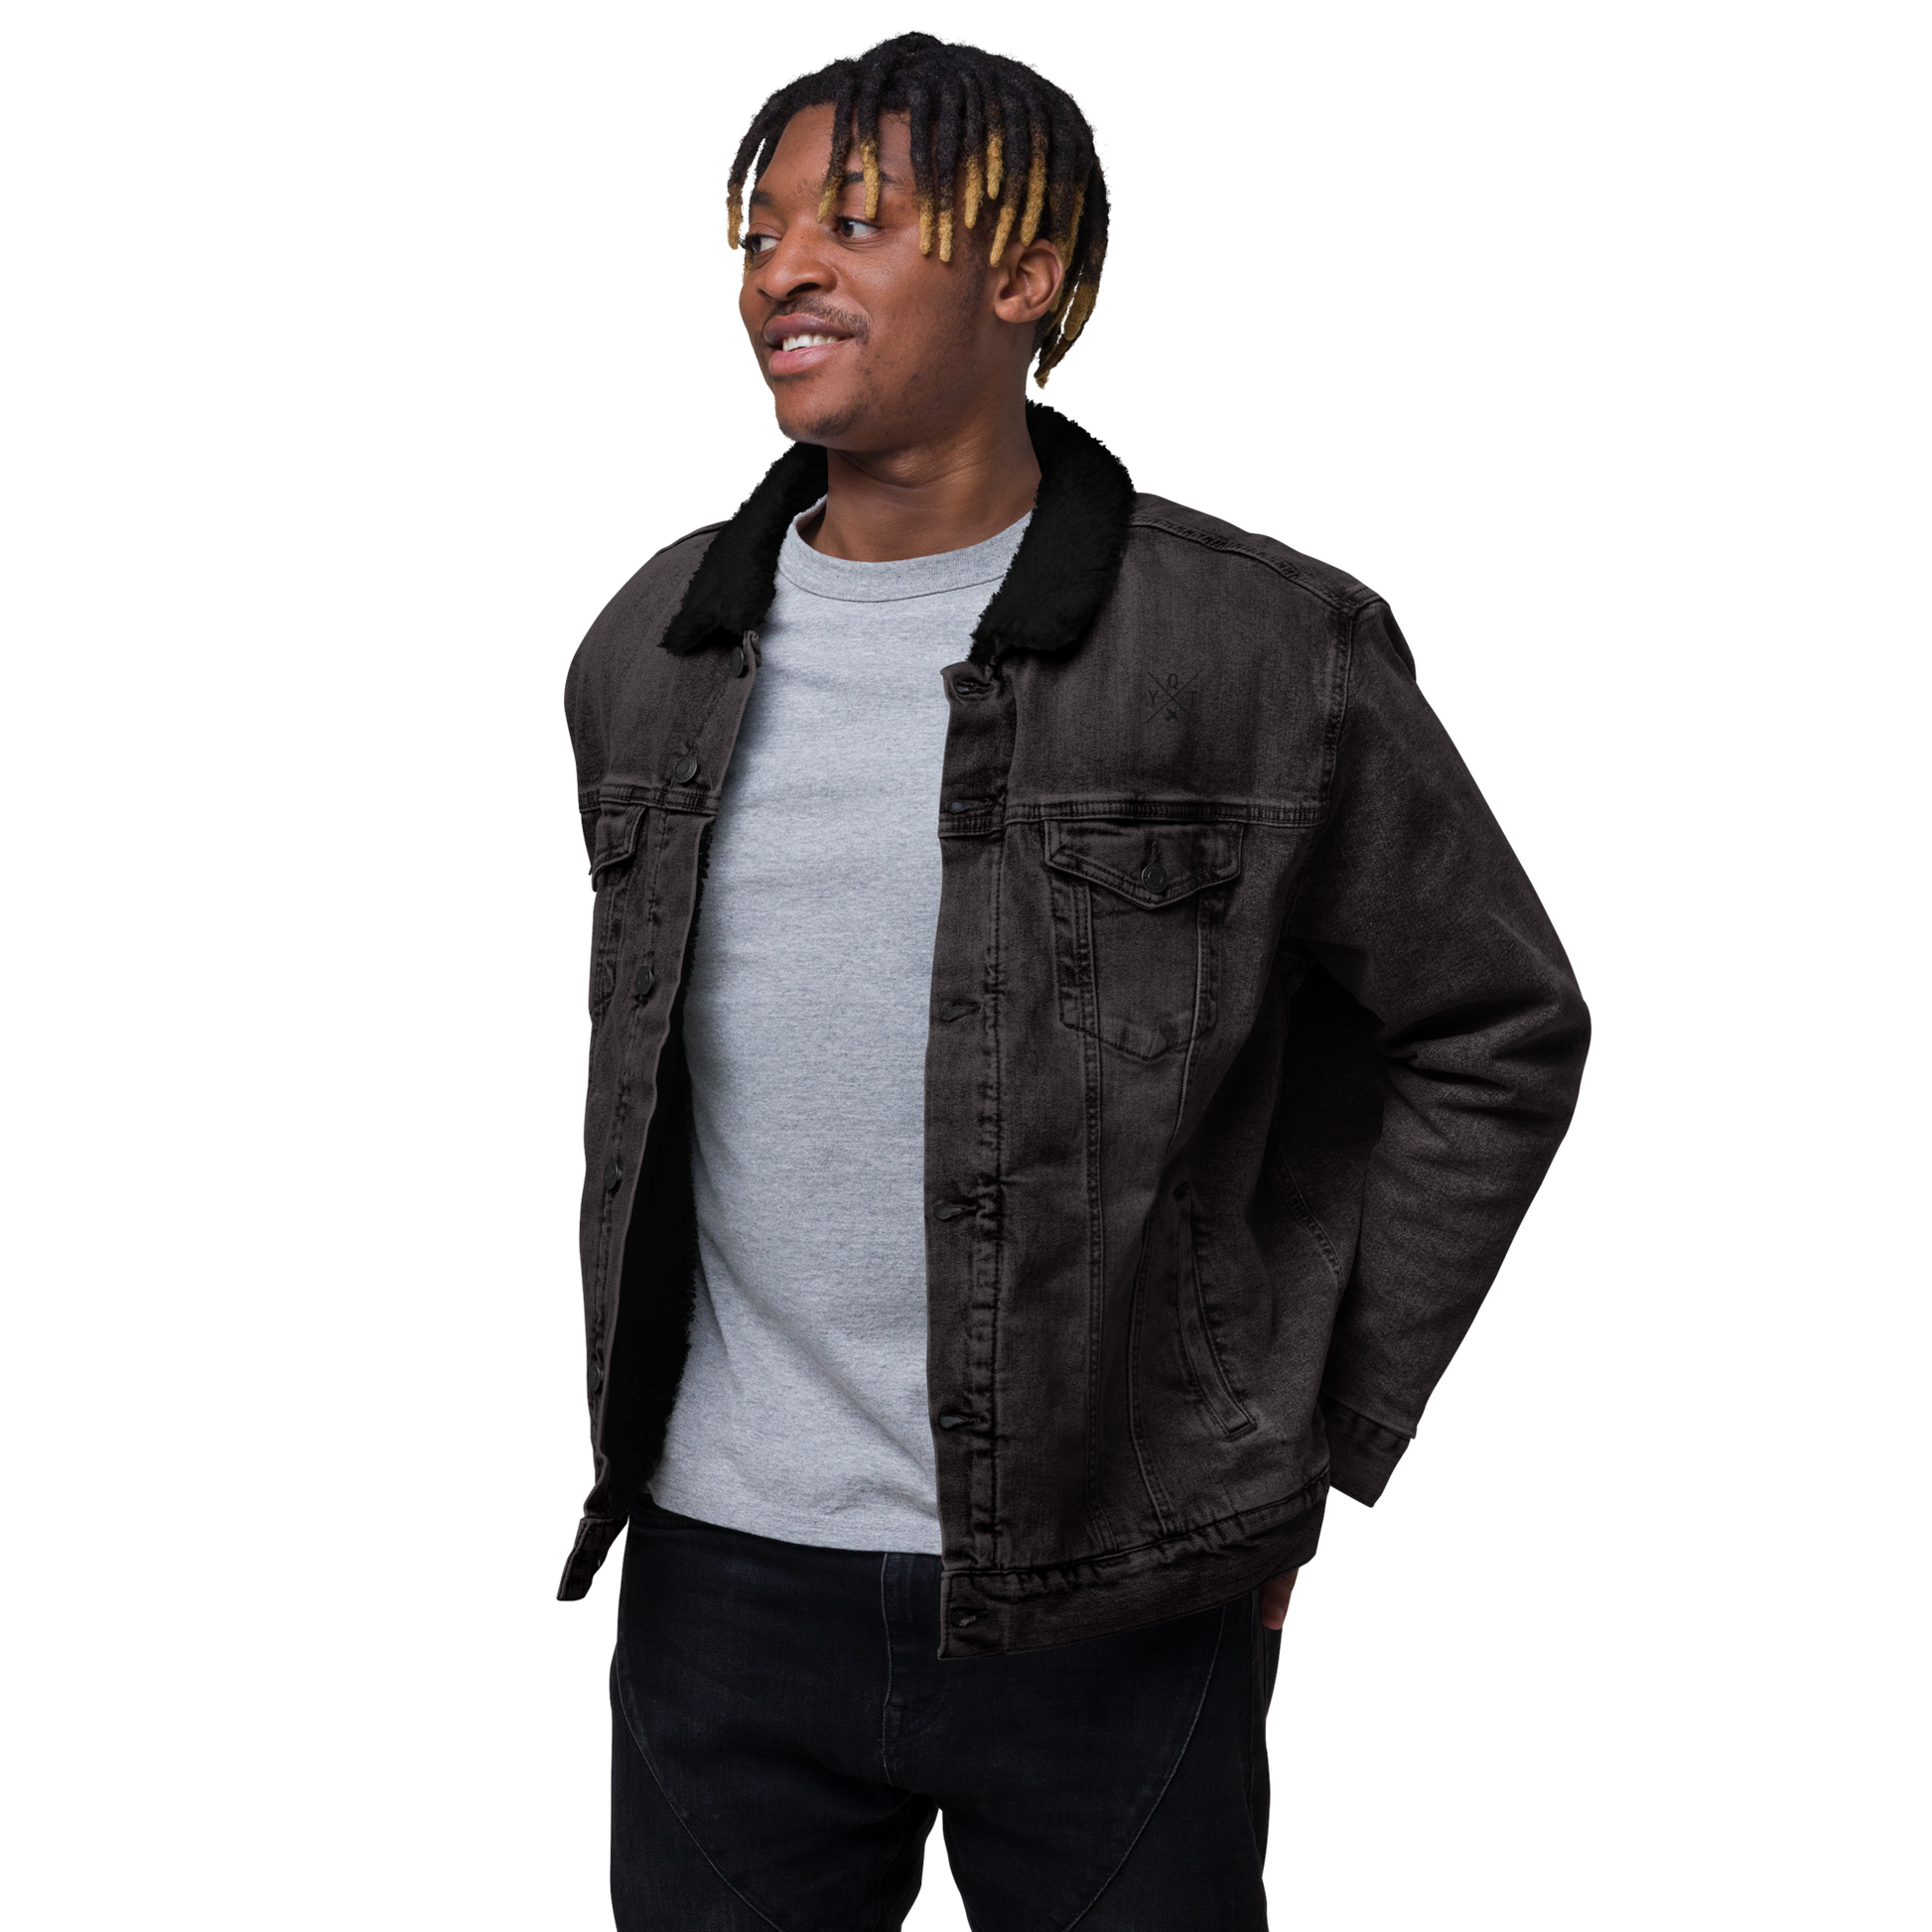 YHM Designs - YQT Thunder Bay Denim Sherpa Jacket - Crossed-X Design with Airport Code and Vintage Propliner - Black & White Embroidery - Image 08